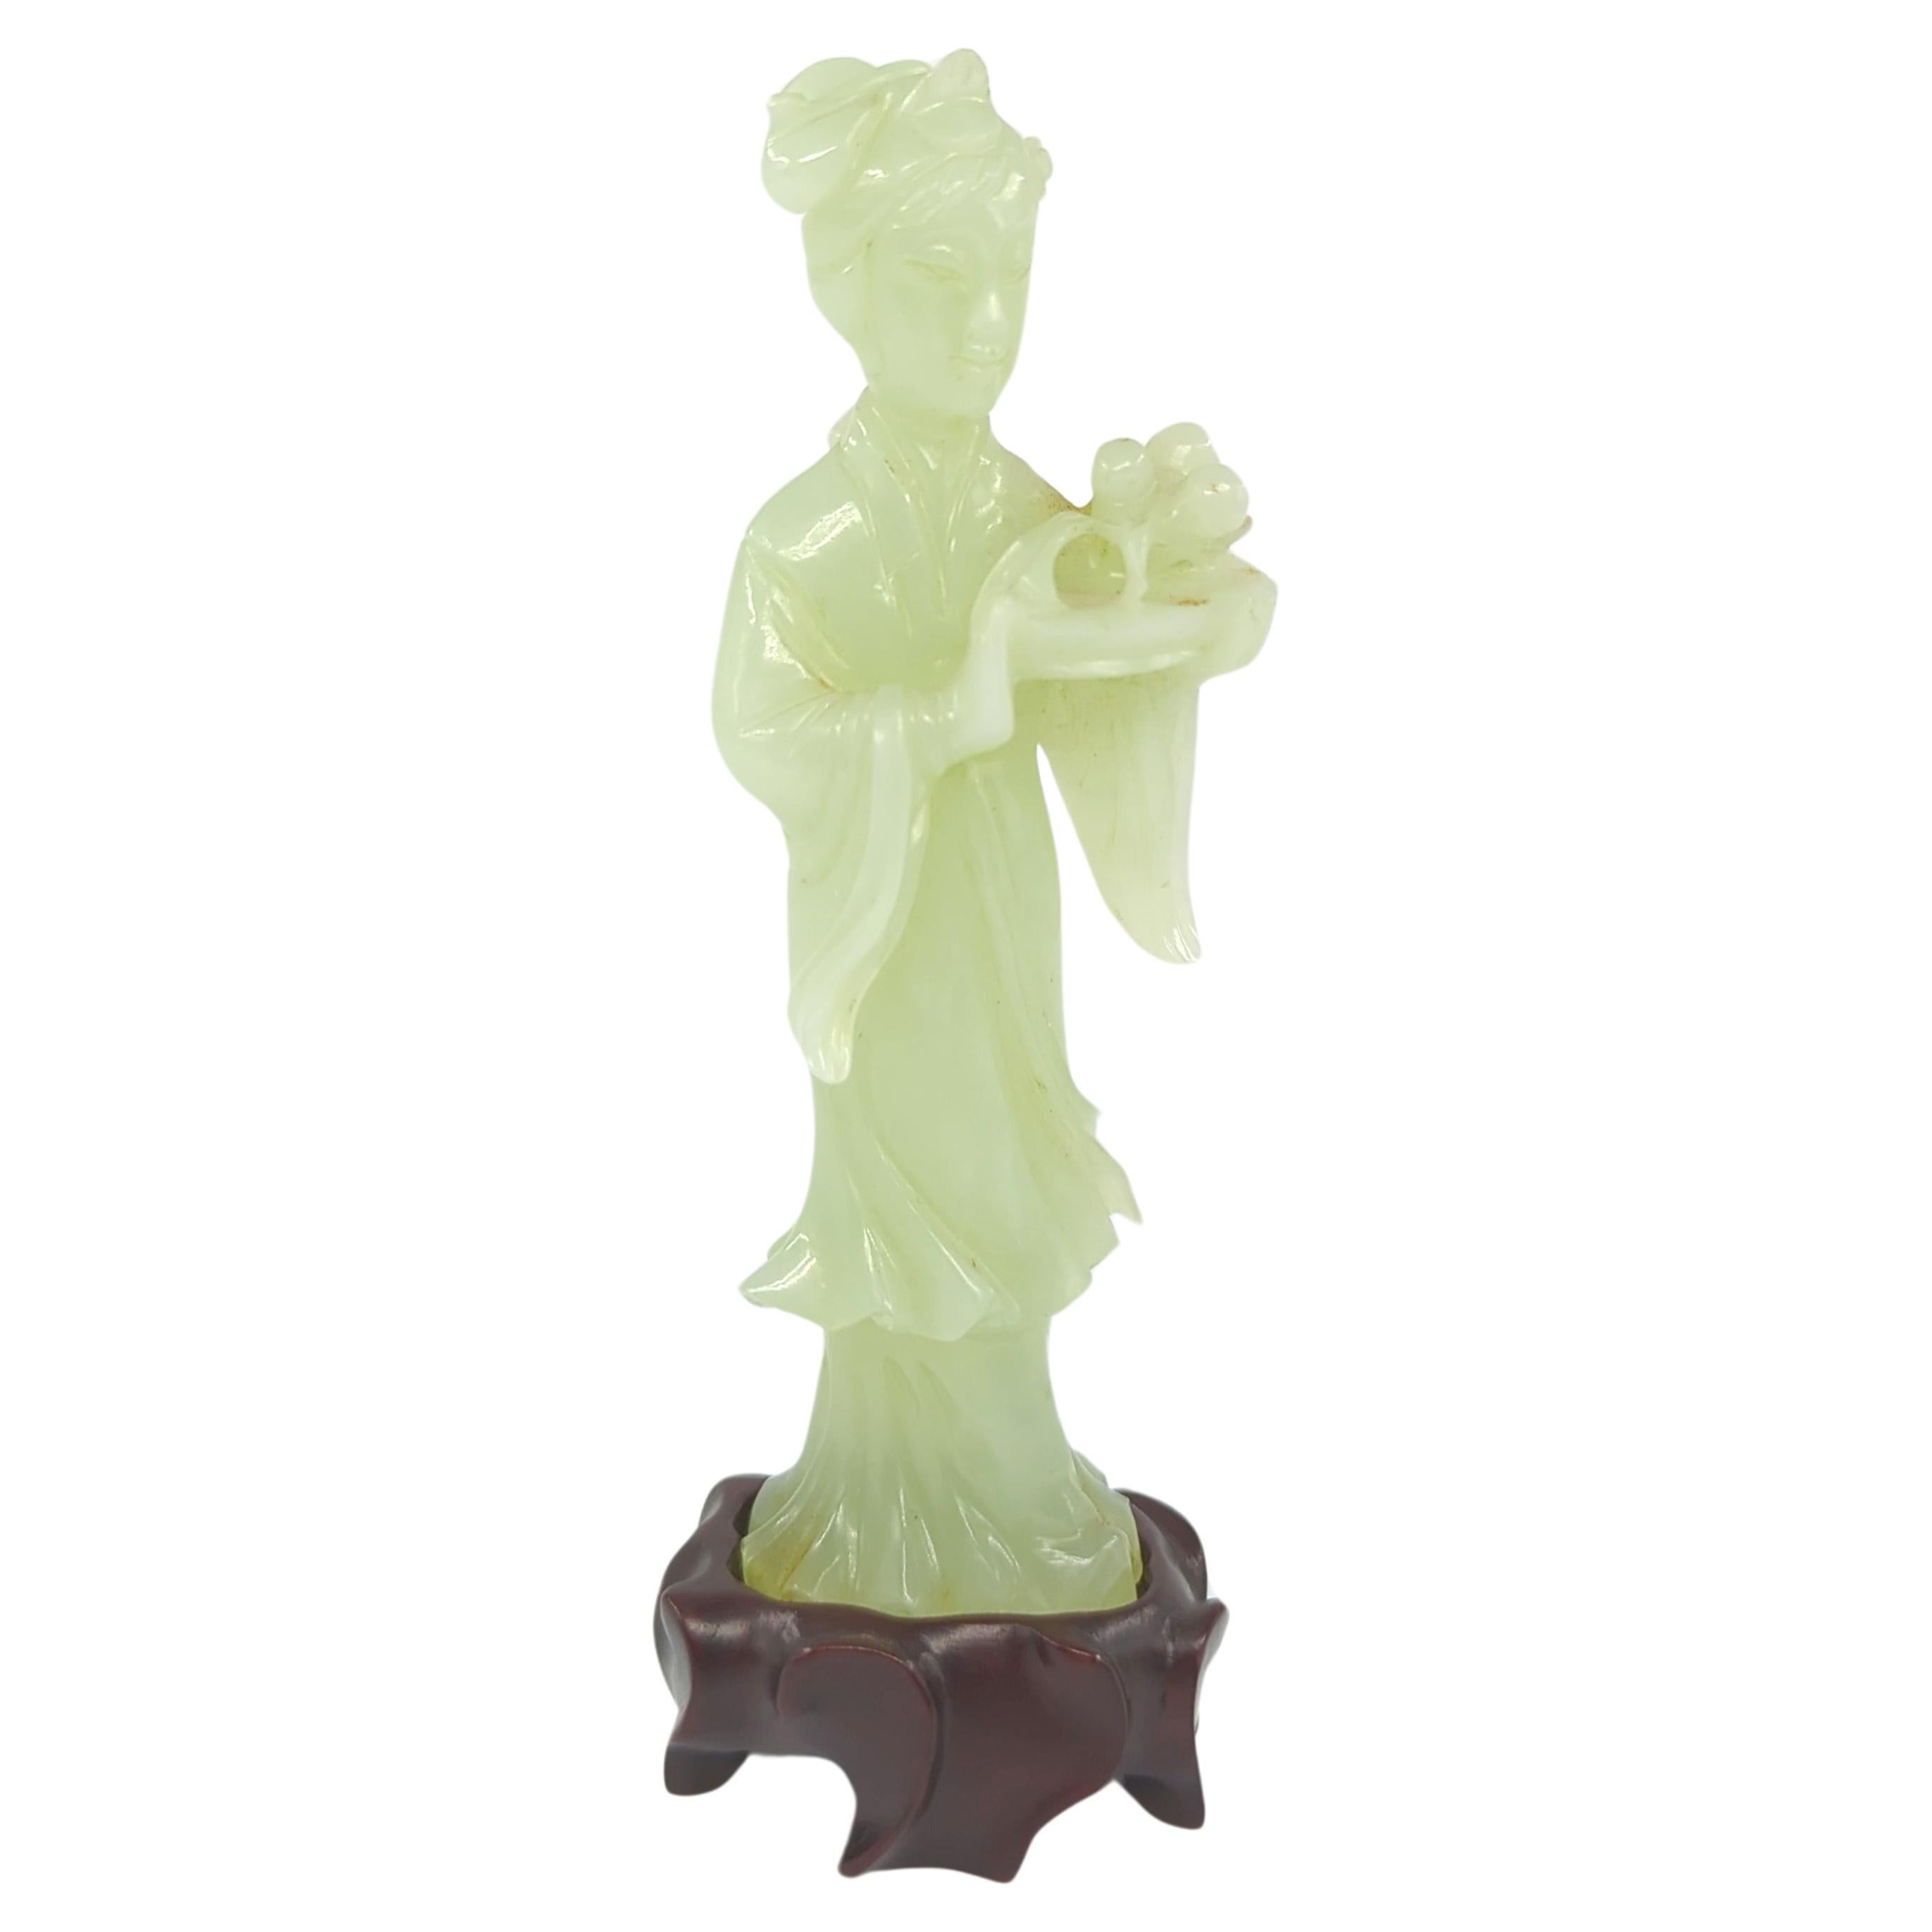 This masterfully carved celadon jade figure represents the epitome of Chinese artistry and craftsmanship. The sculpture features a beauty dressed in flowing traditional attire, capturing the essence of grace and elegance. She is depicted holding a